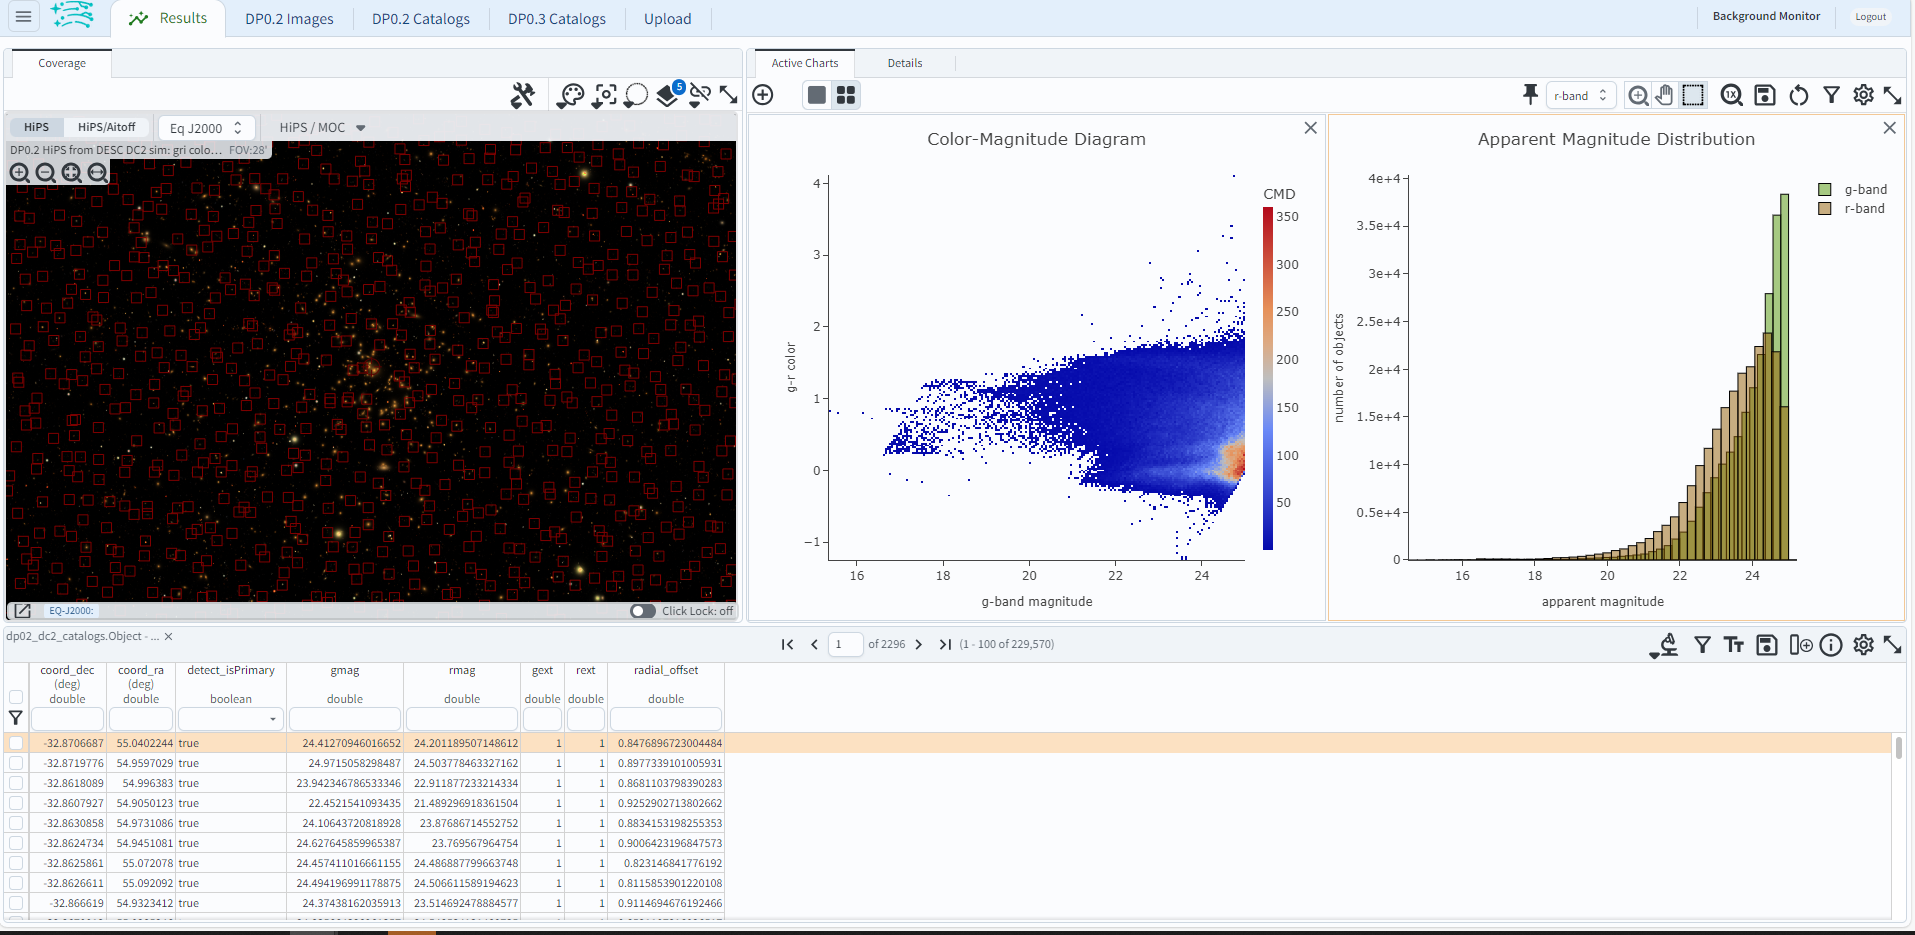 A screenshot of the portal's results view showing both the color-magnitude heatmap and the magnitude histograms for all galaxies returned by the original search.